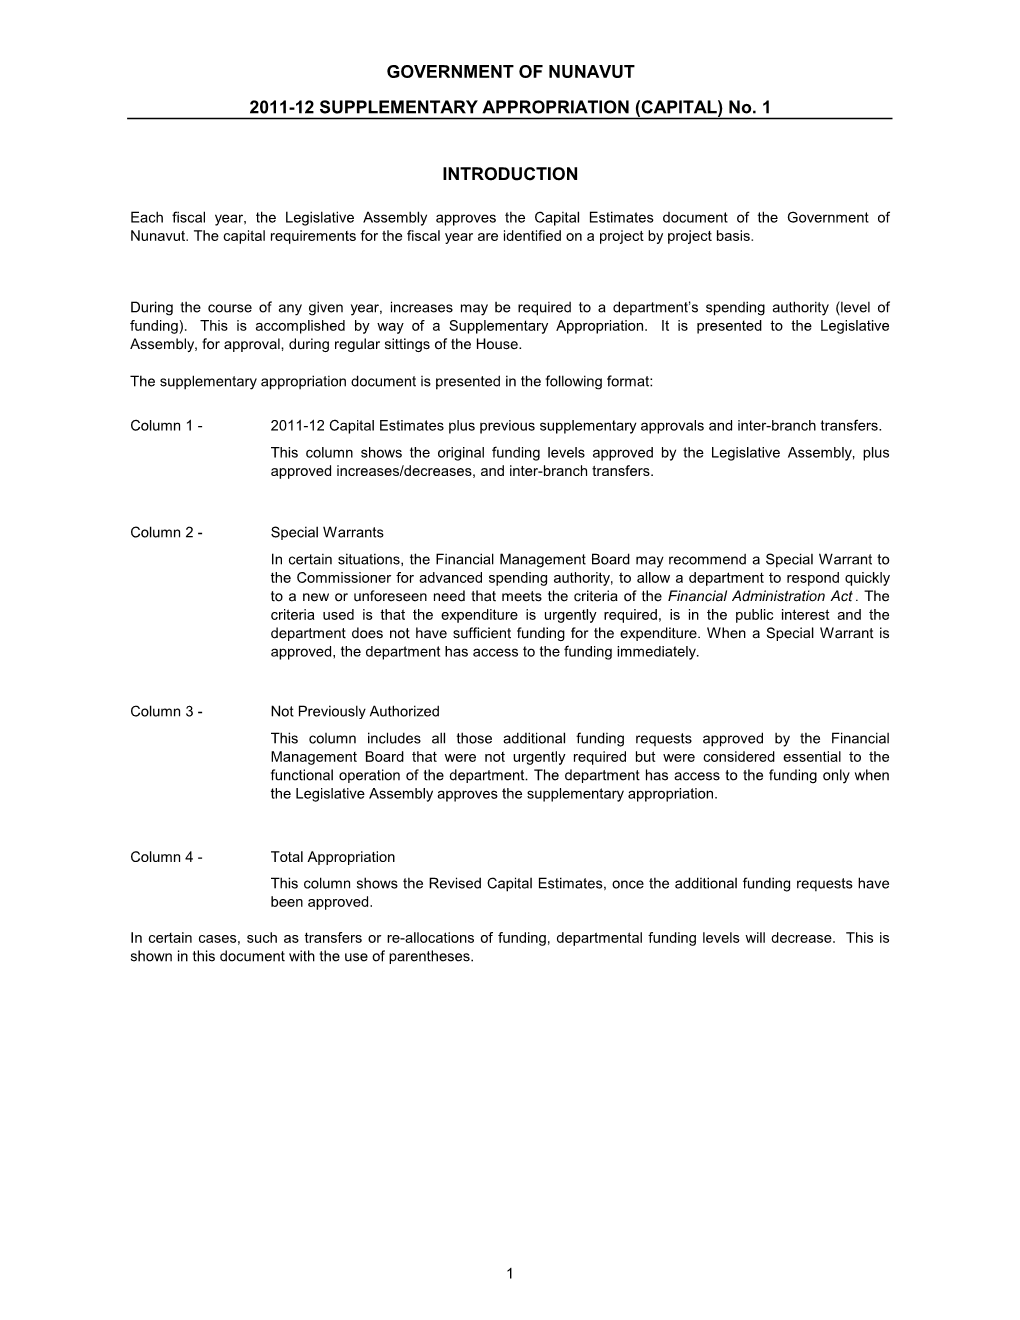 GOVERNMENT of NUNAVUT 2011-12 SUPPLEMENTARY APPROPRIATION (CAPITAL) No. 1 INTRODUCTION